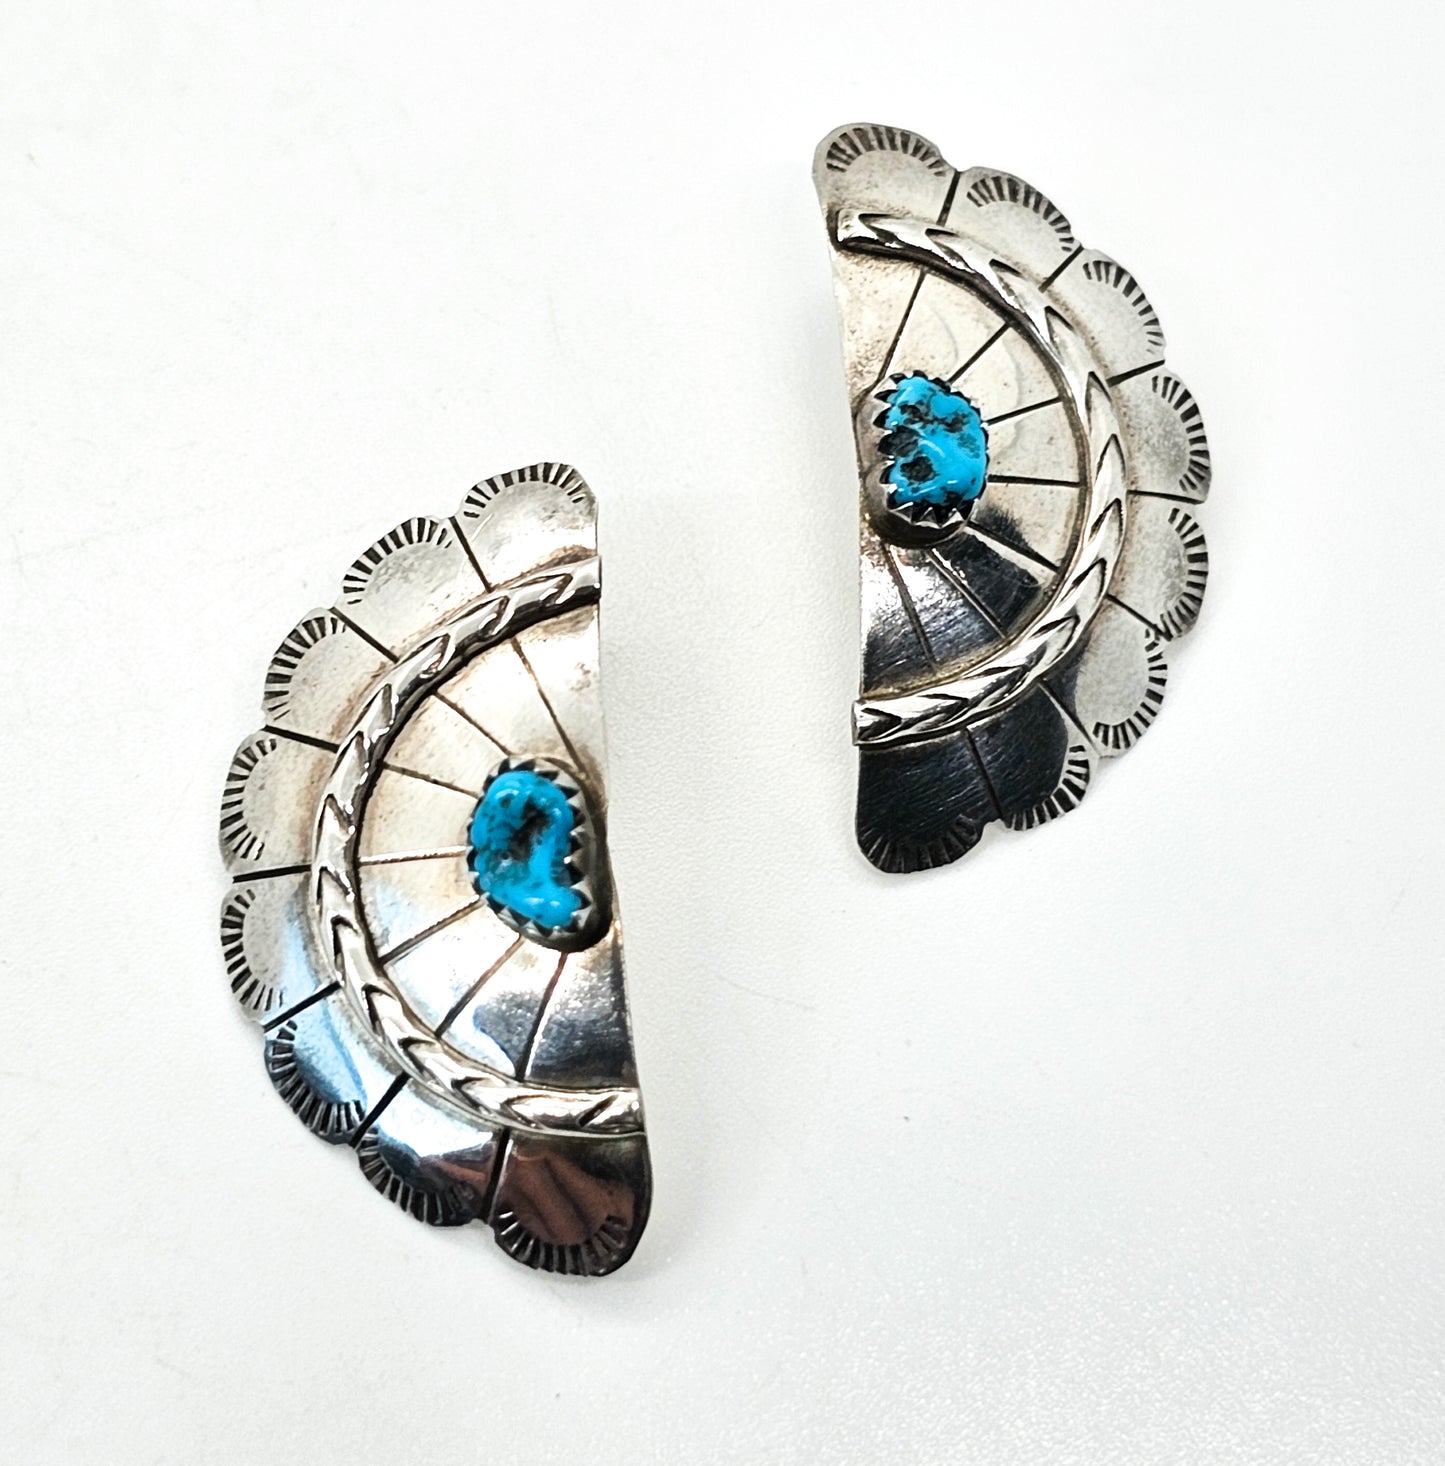 Turquoise nugget Native American vintage sterling silver split concho earrings